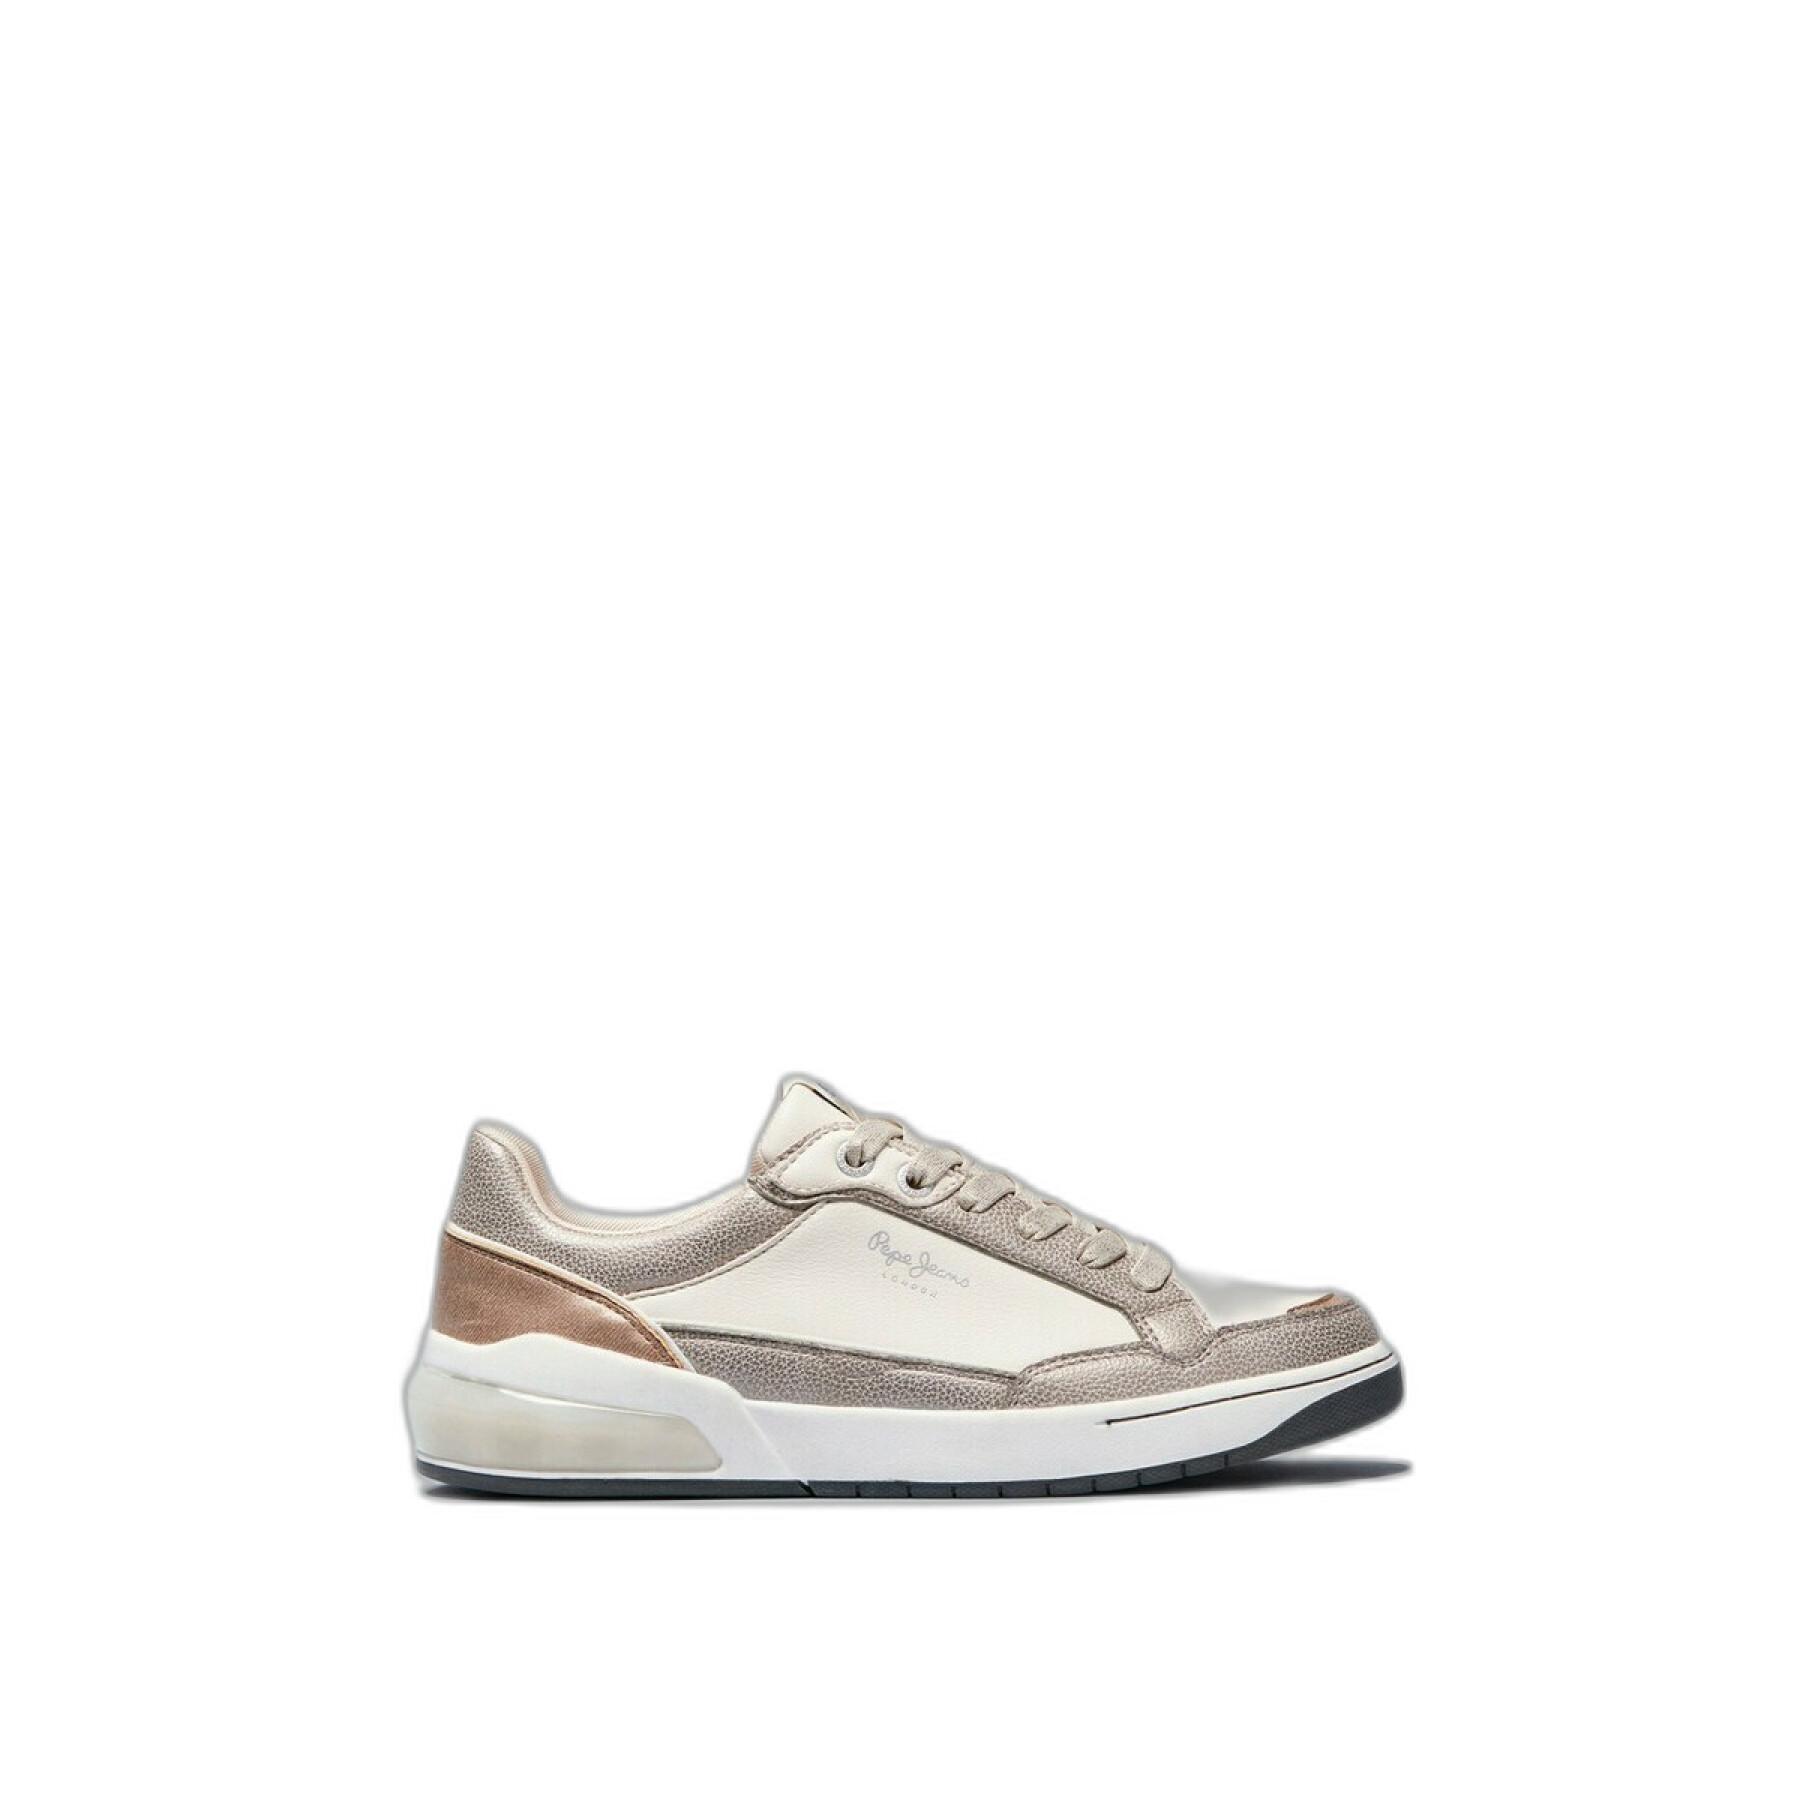 Damestrainers Pepe Jeans Marble Glam